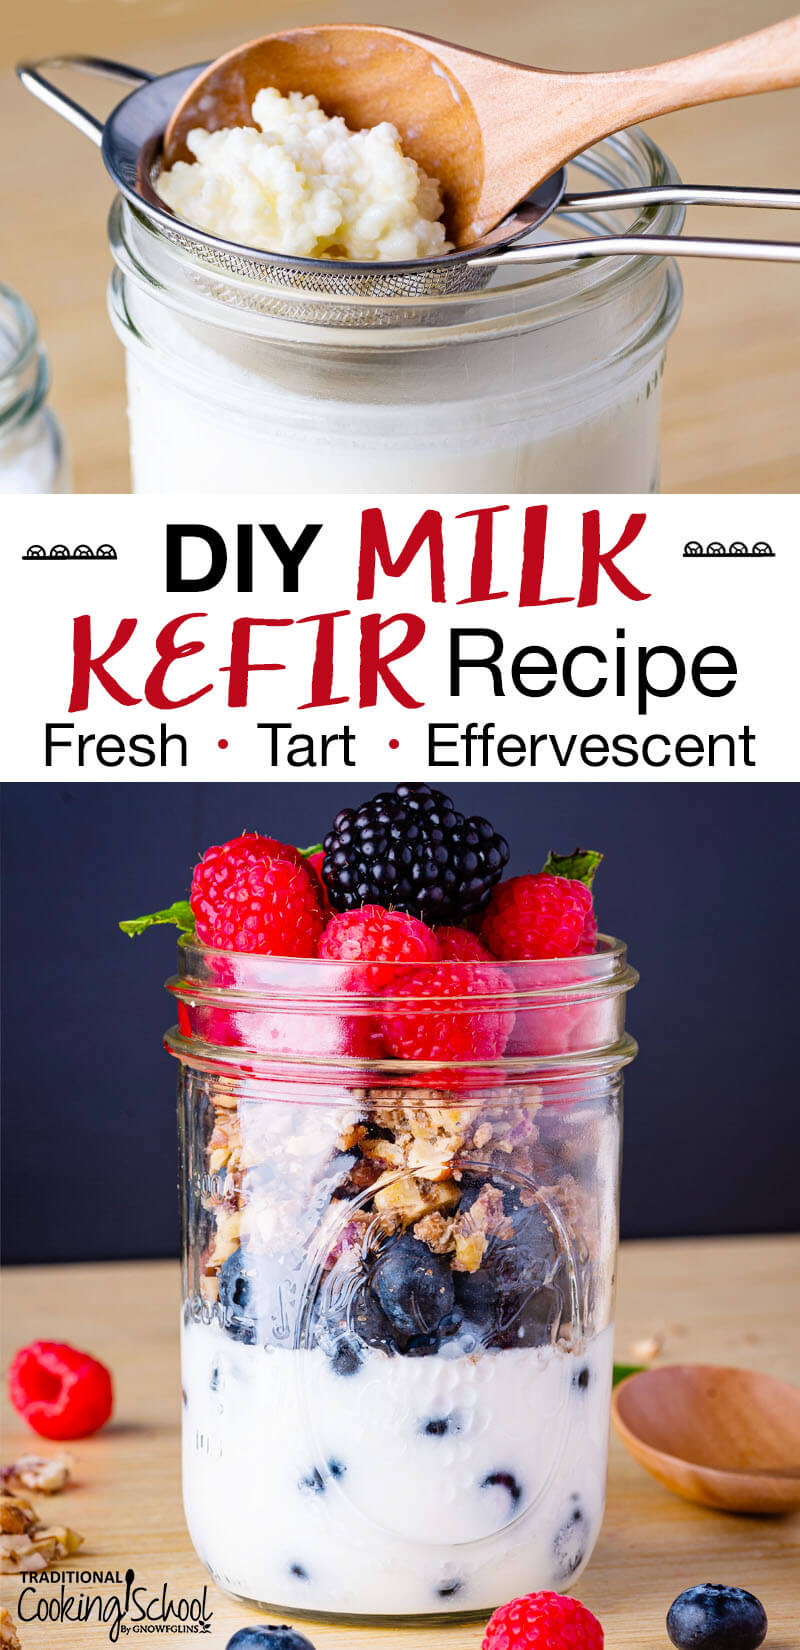 Photo collage of straining kefir grains out of a finished batch of kefir using a wooden spoon and stainless steel strainer. Second photo is of finished kefir topped with fresh fruit and granola. Text overlay says: "DIY Milk Kefir Recipe (Fresh, Tart, Effervescent)"